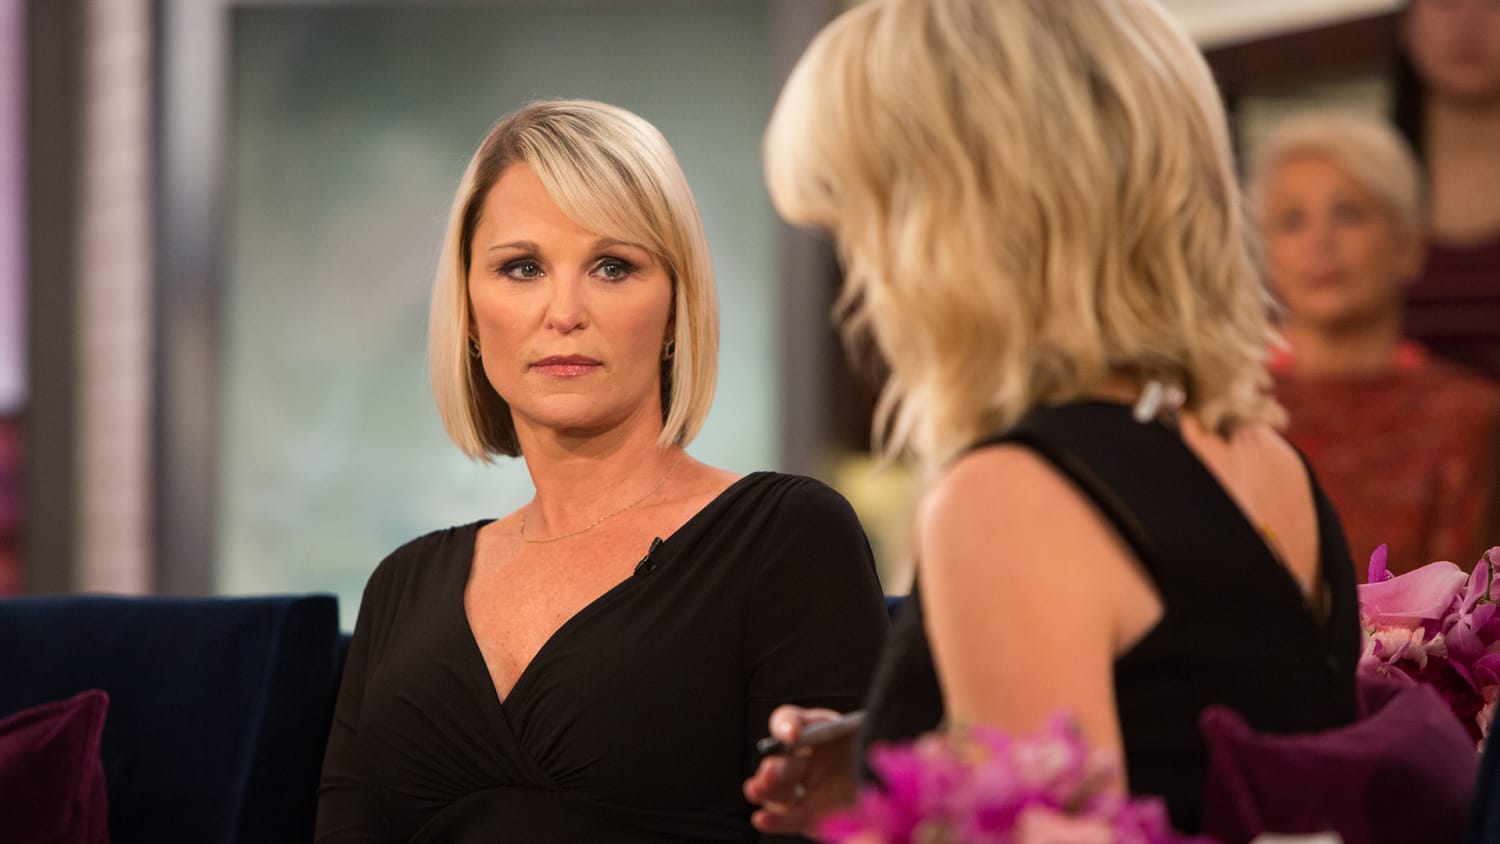 Bill O'Reilly accuser Juliet Huddy on speaking out: Women like me are ...